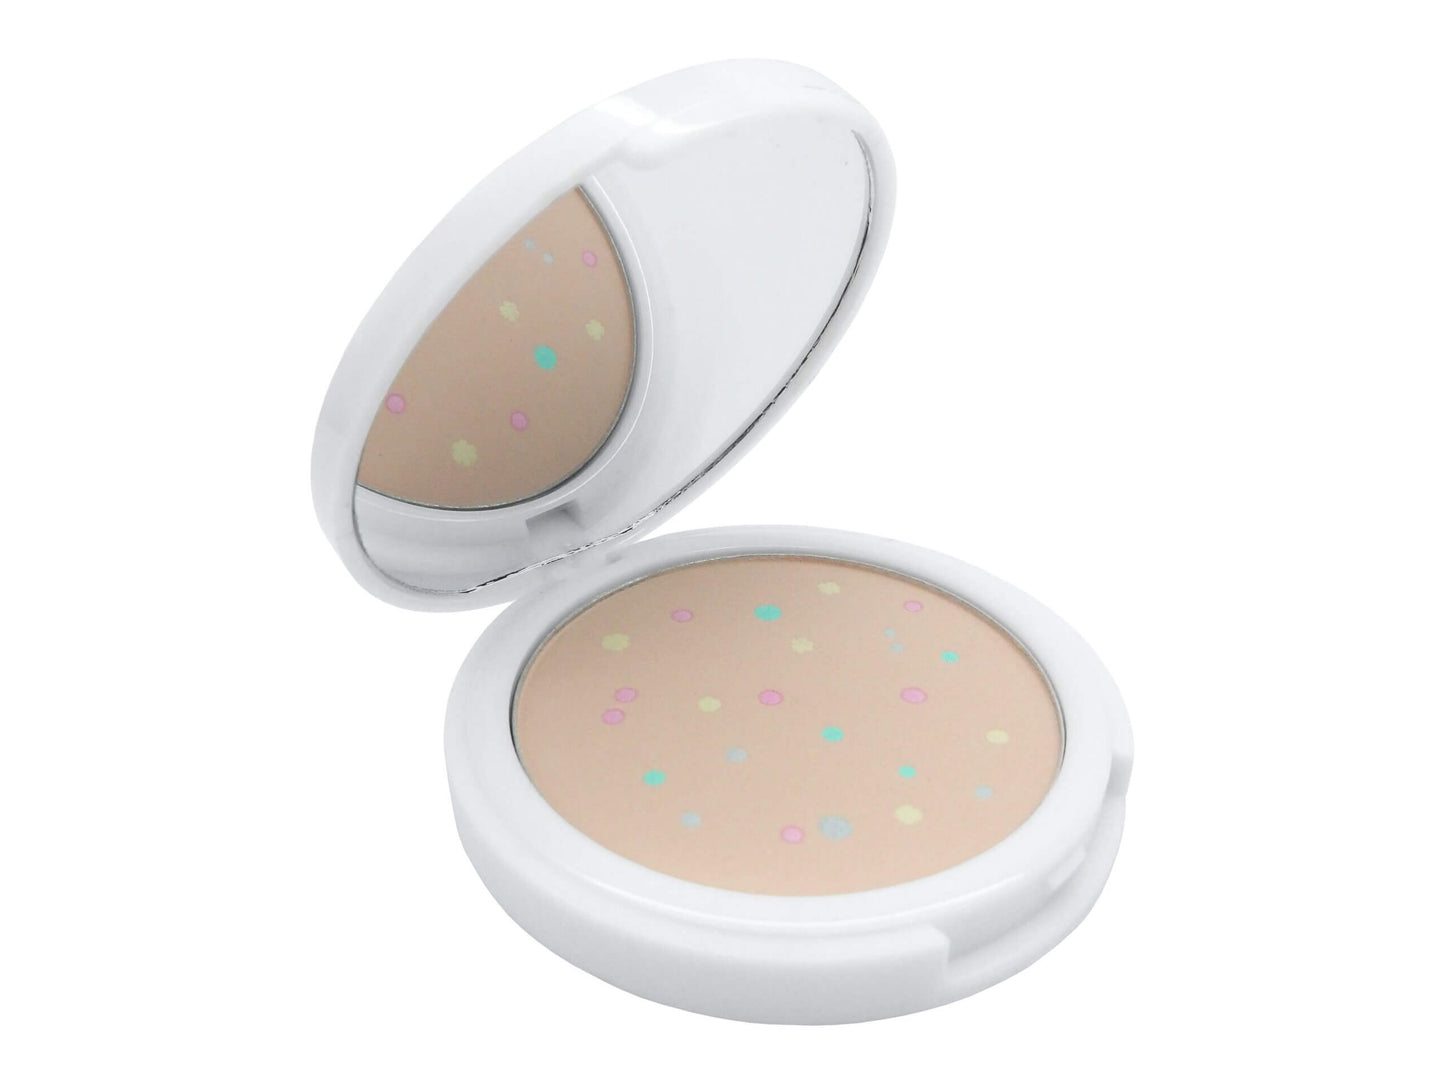 W7 Flawless Face Colour Correcting Mineral Powder